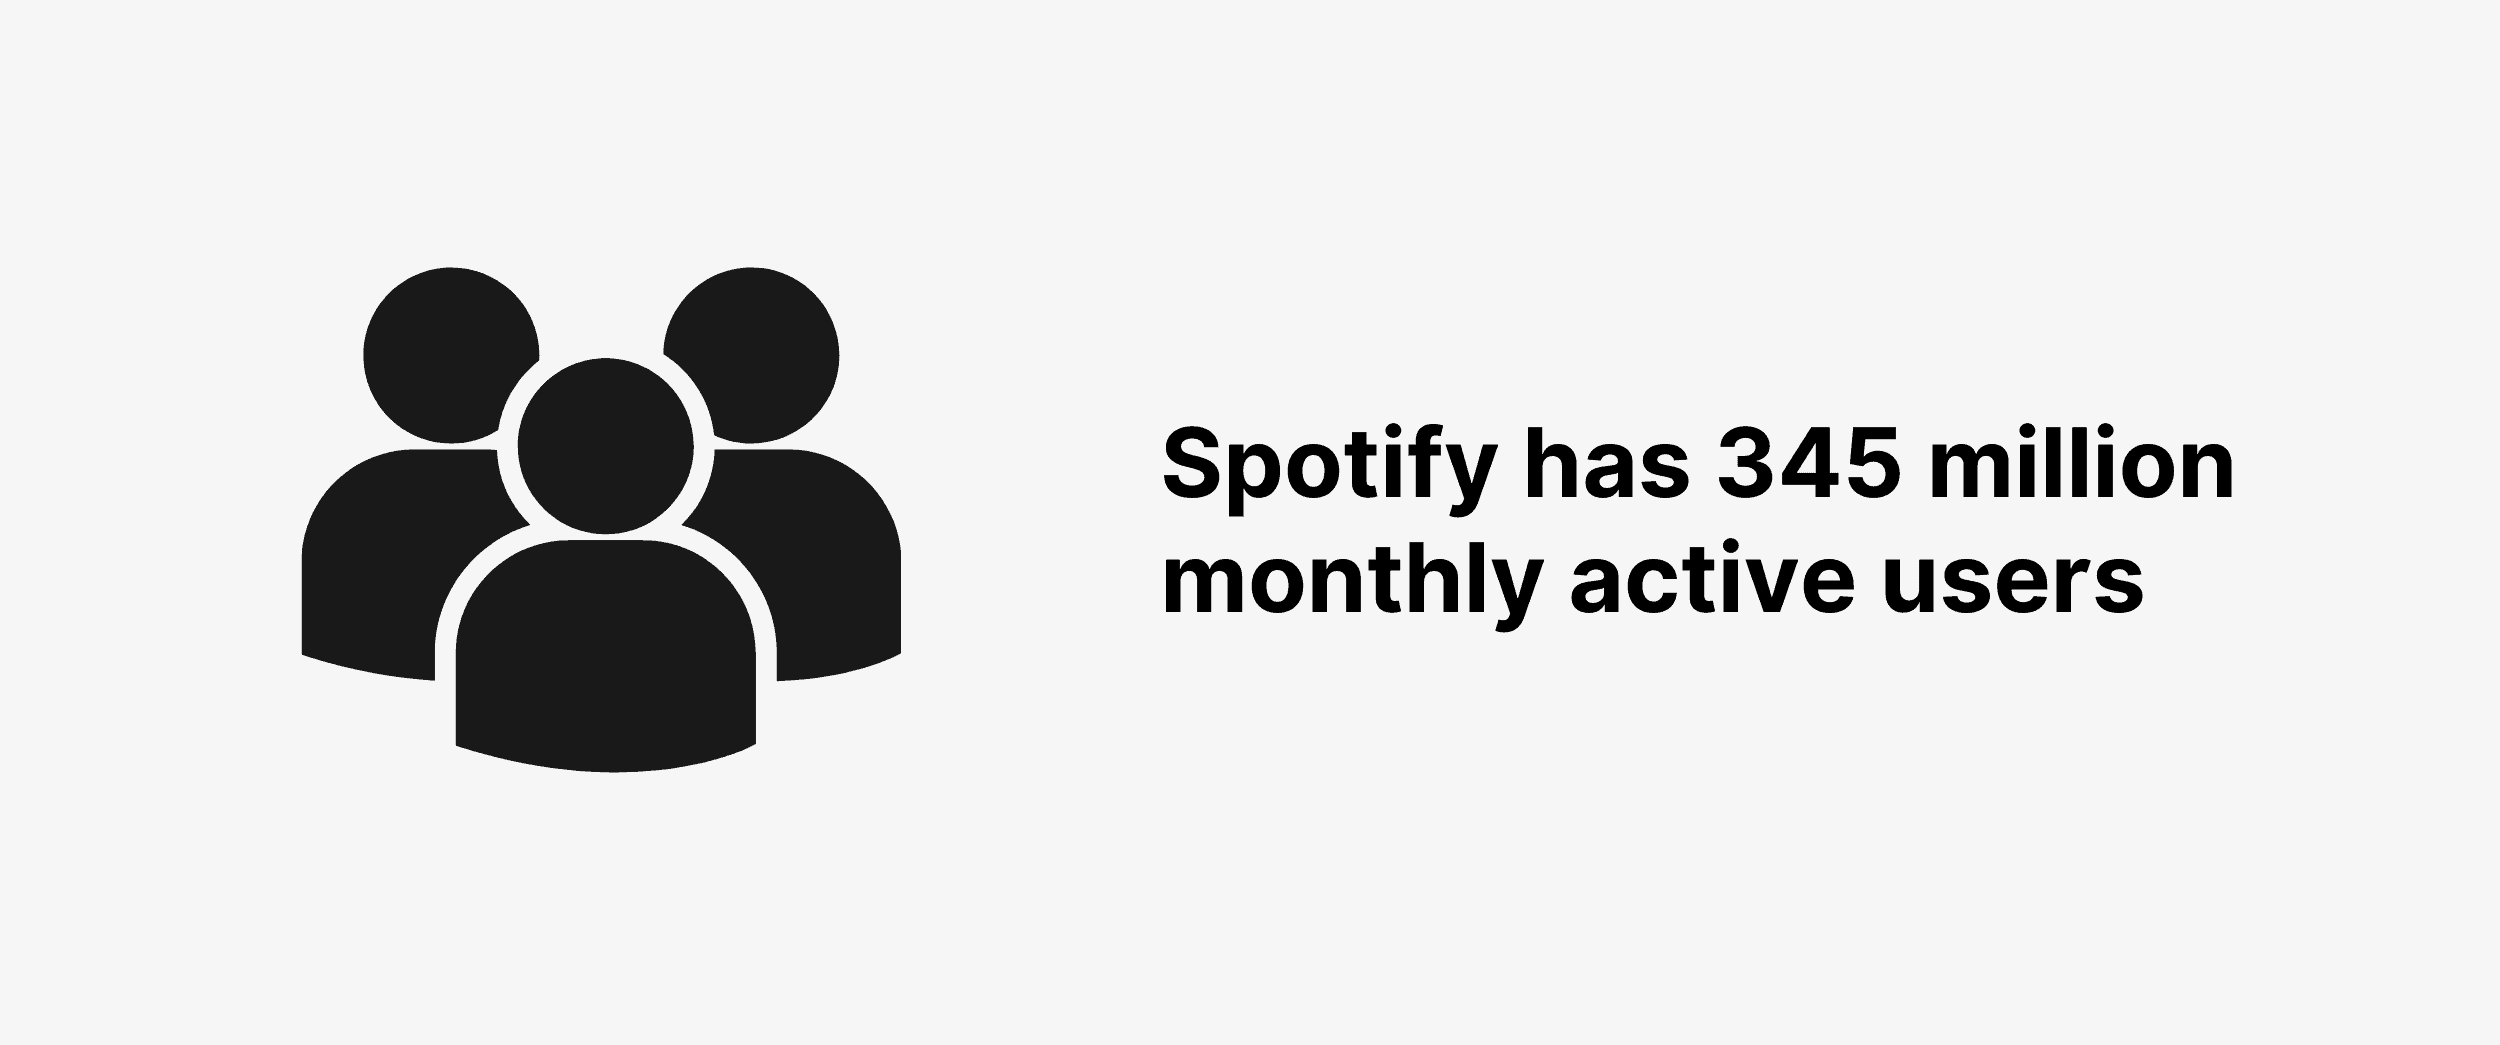 Spotify has 345 million monthly active users